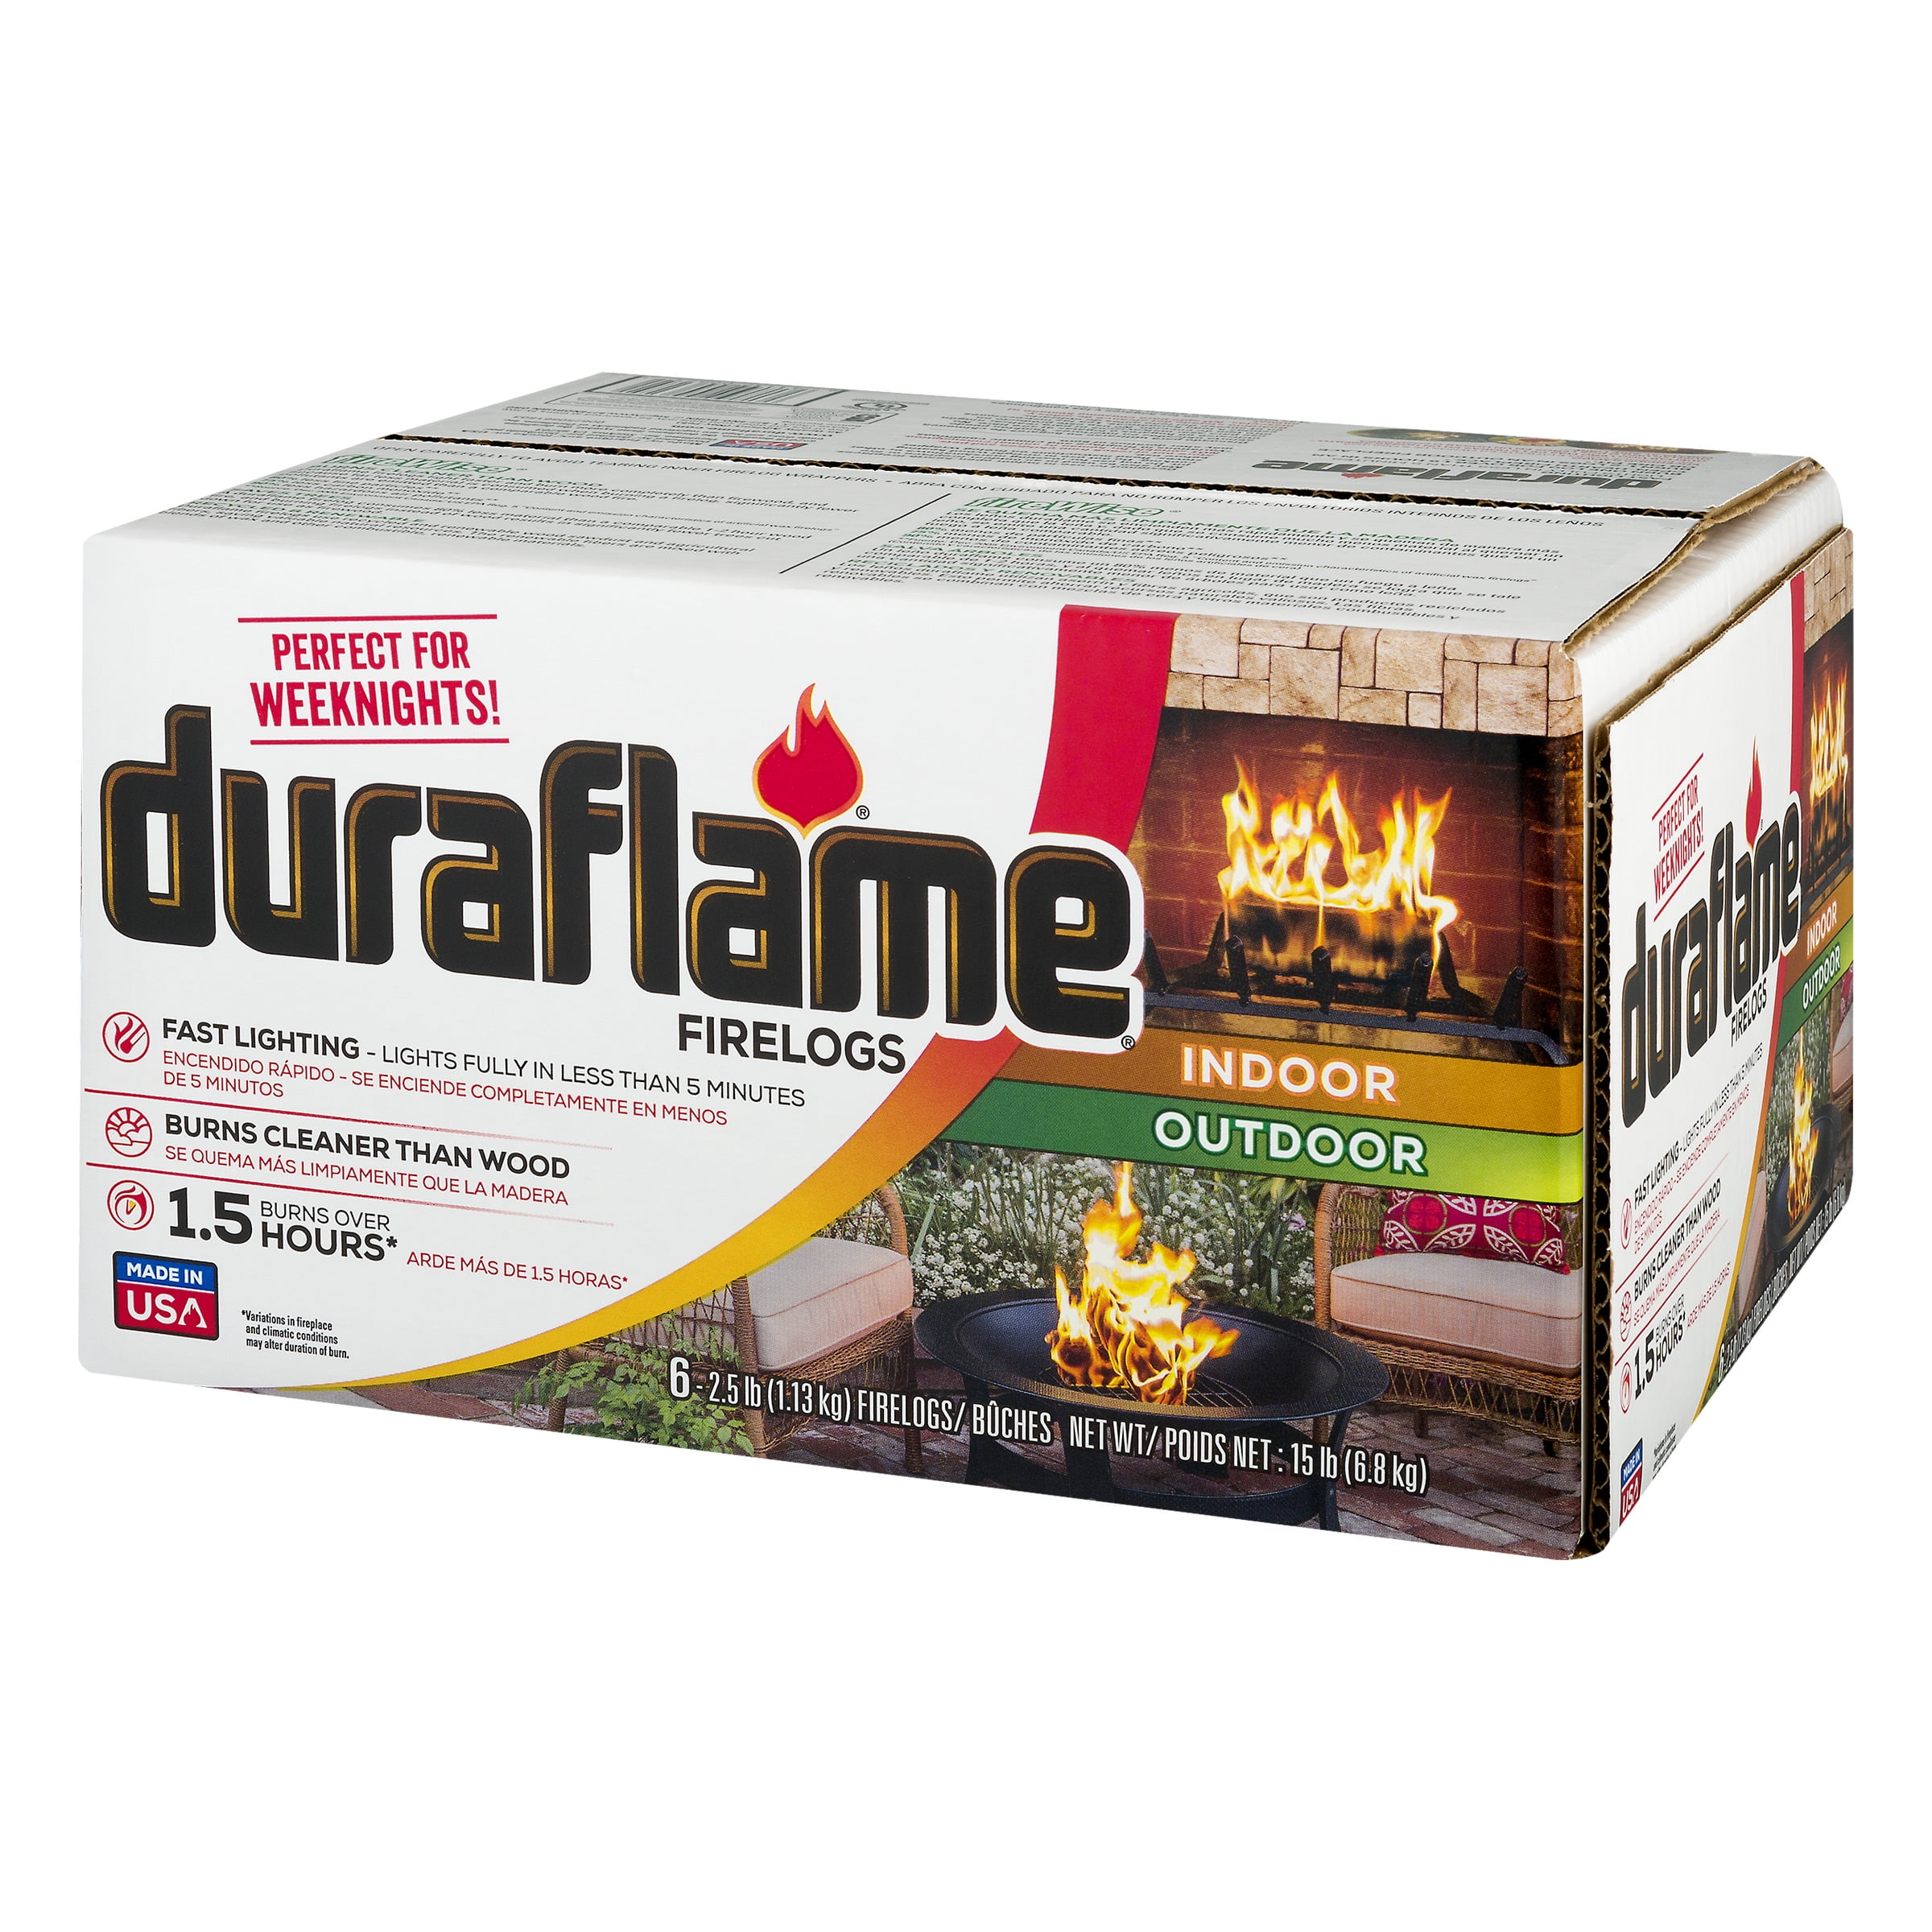 Open Box Duraflame 2.5lb Indoor and Outdoor Firelogs, 6-Pack Case - Burn for 1.5 Hours